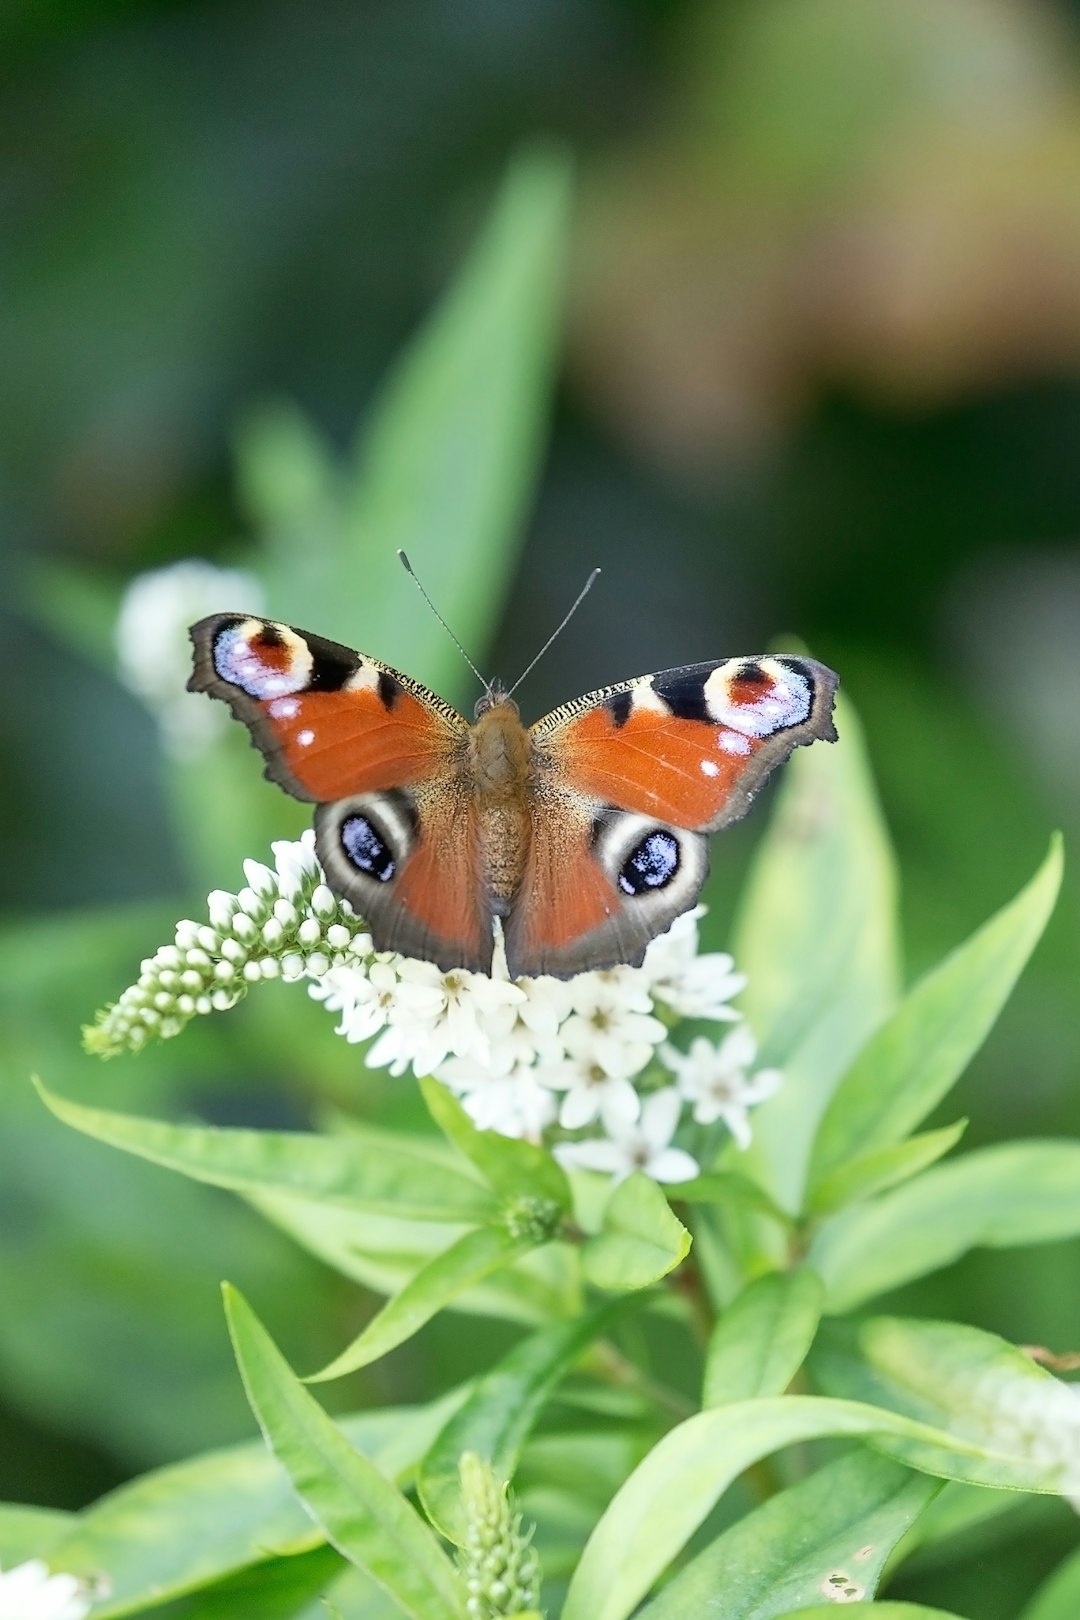 peacock butterfly perched on white flower in close up photography during daytime